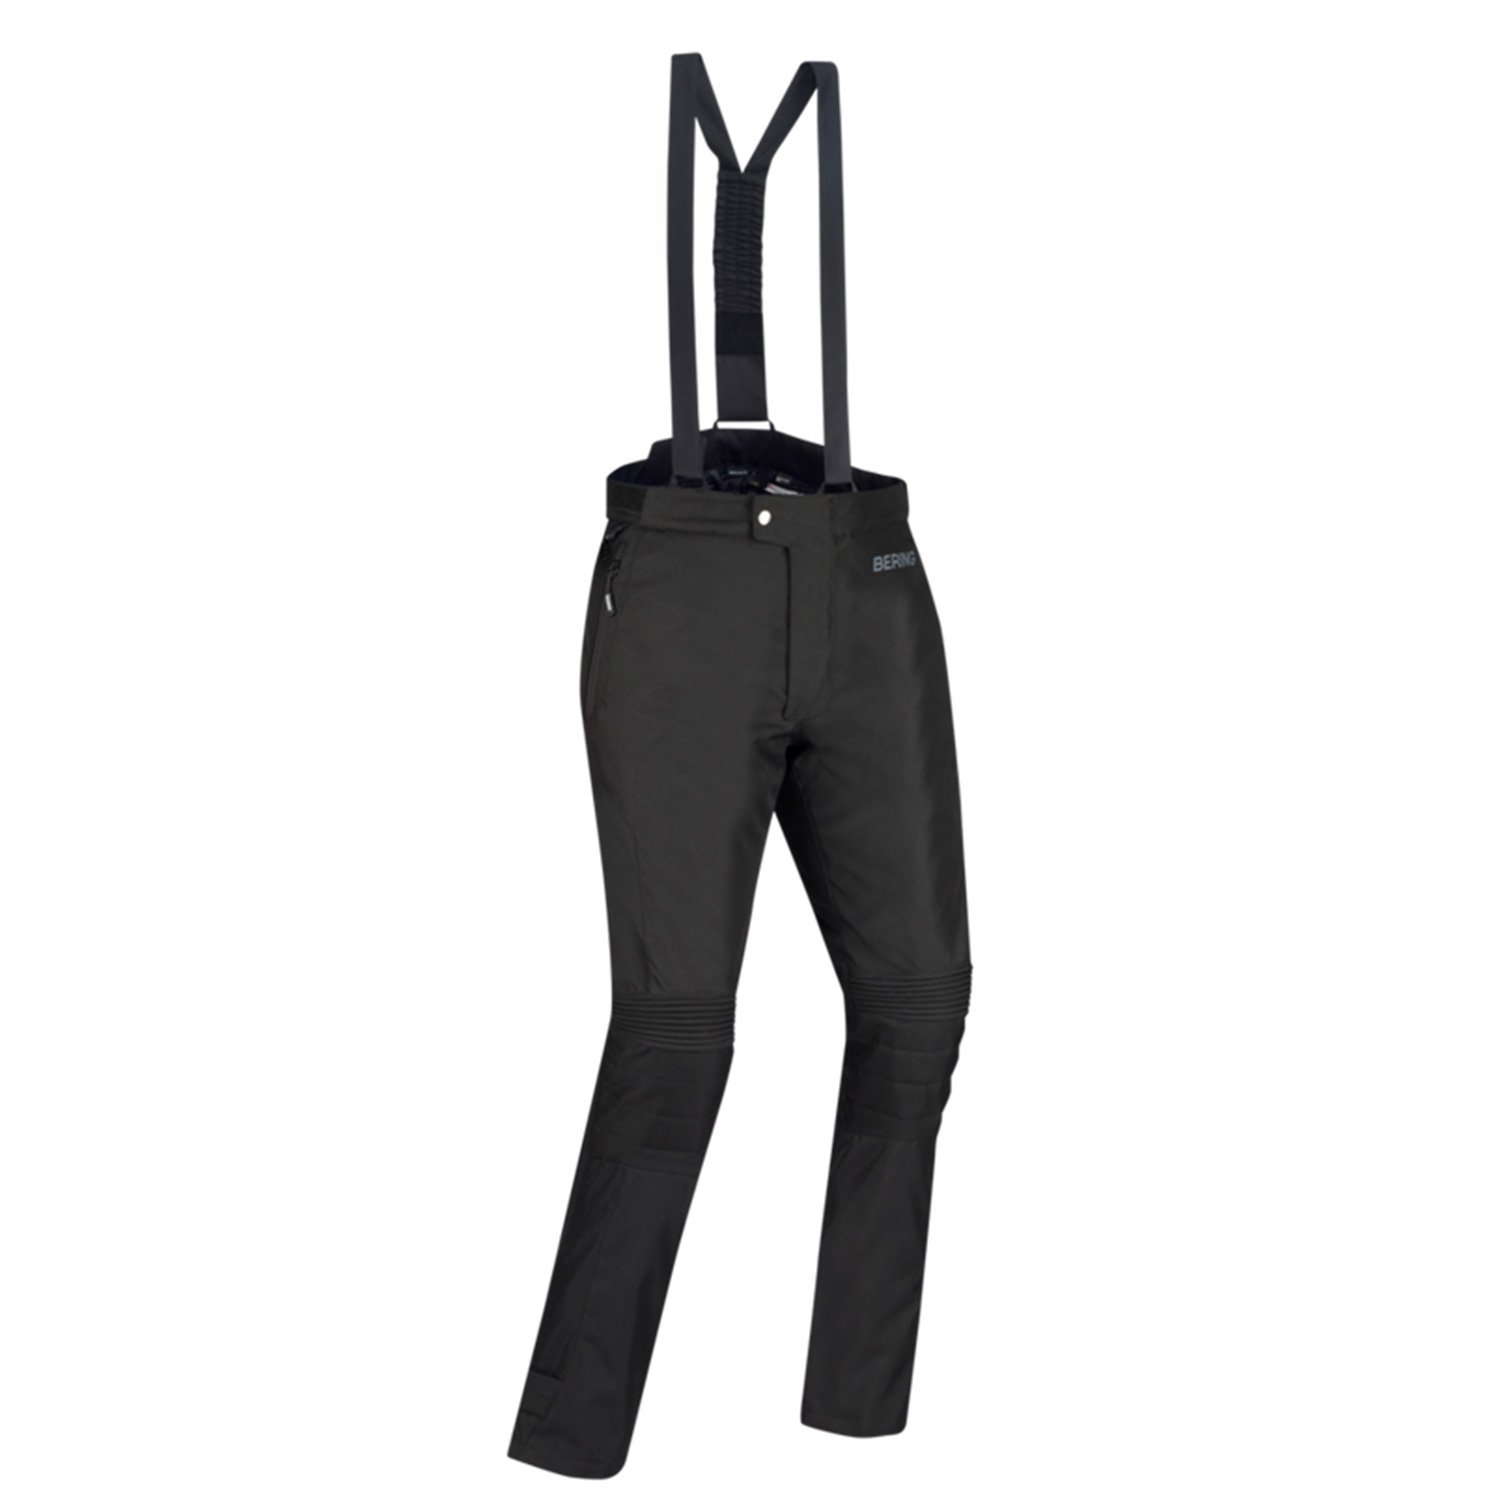 Image of Bering Lady Siberia Trousers Black Size T4 ID 3660815182932